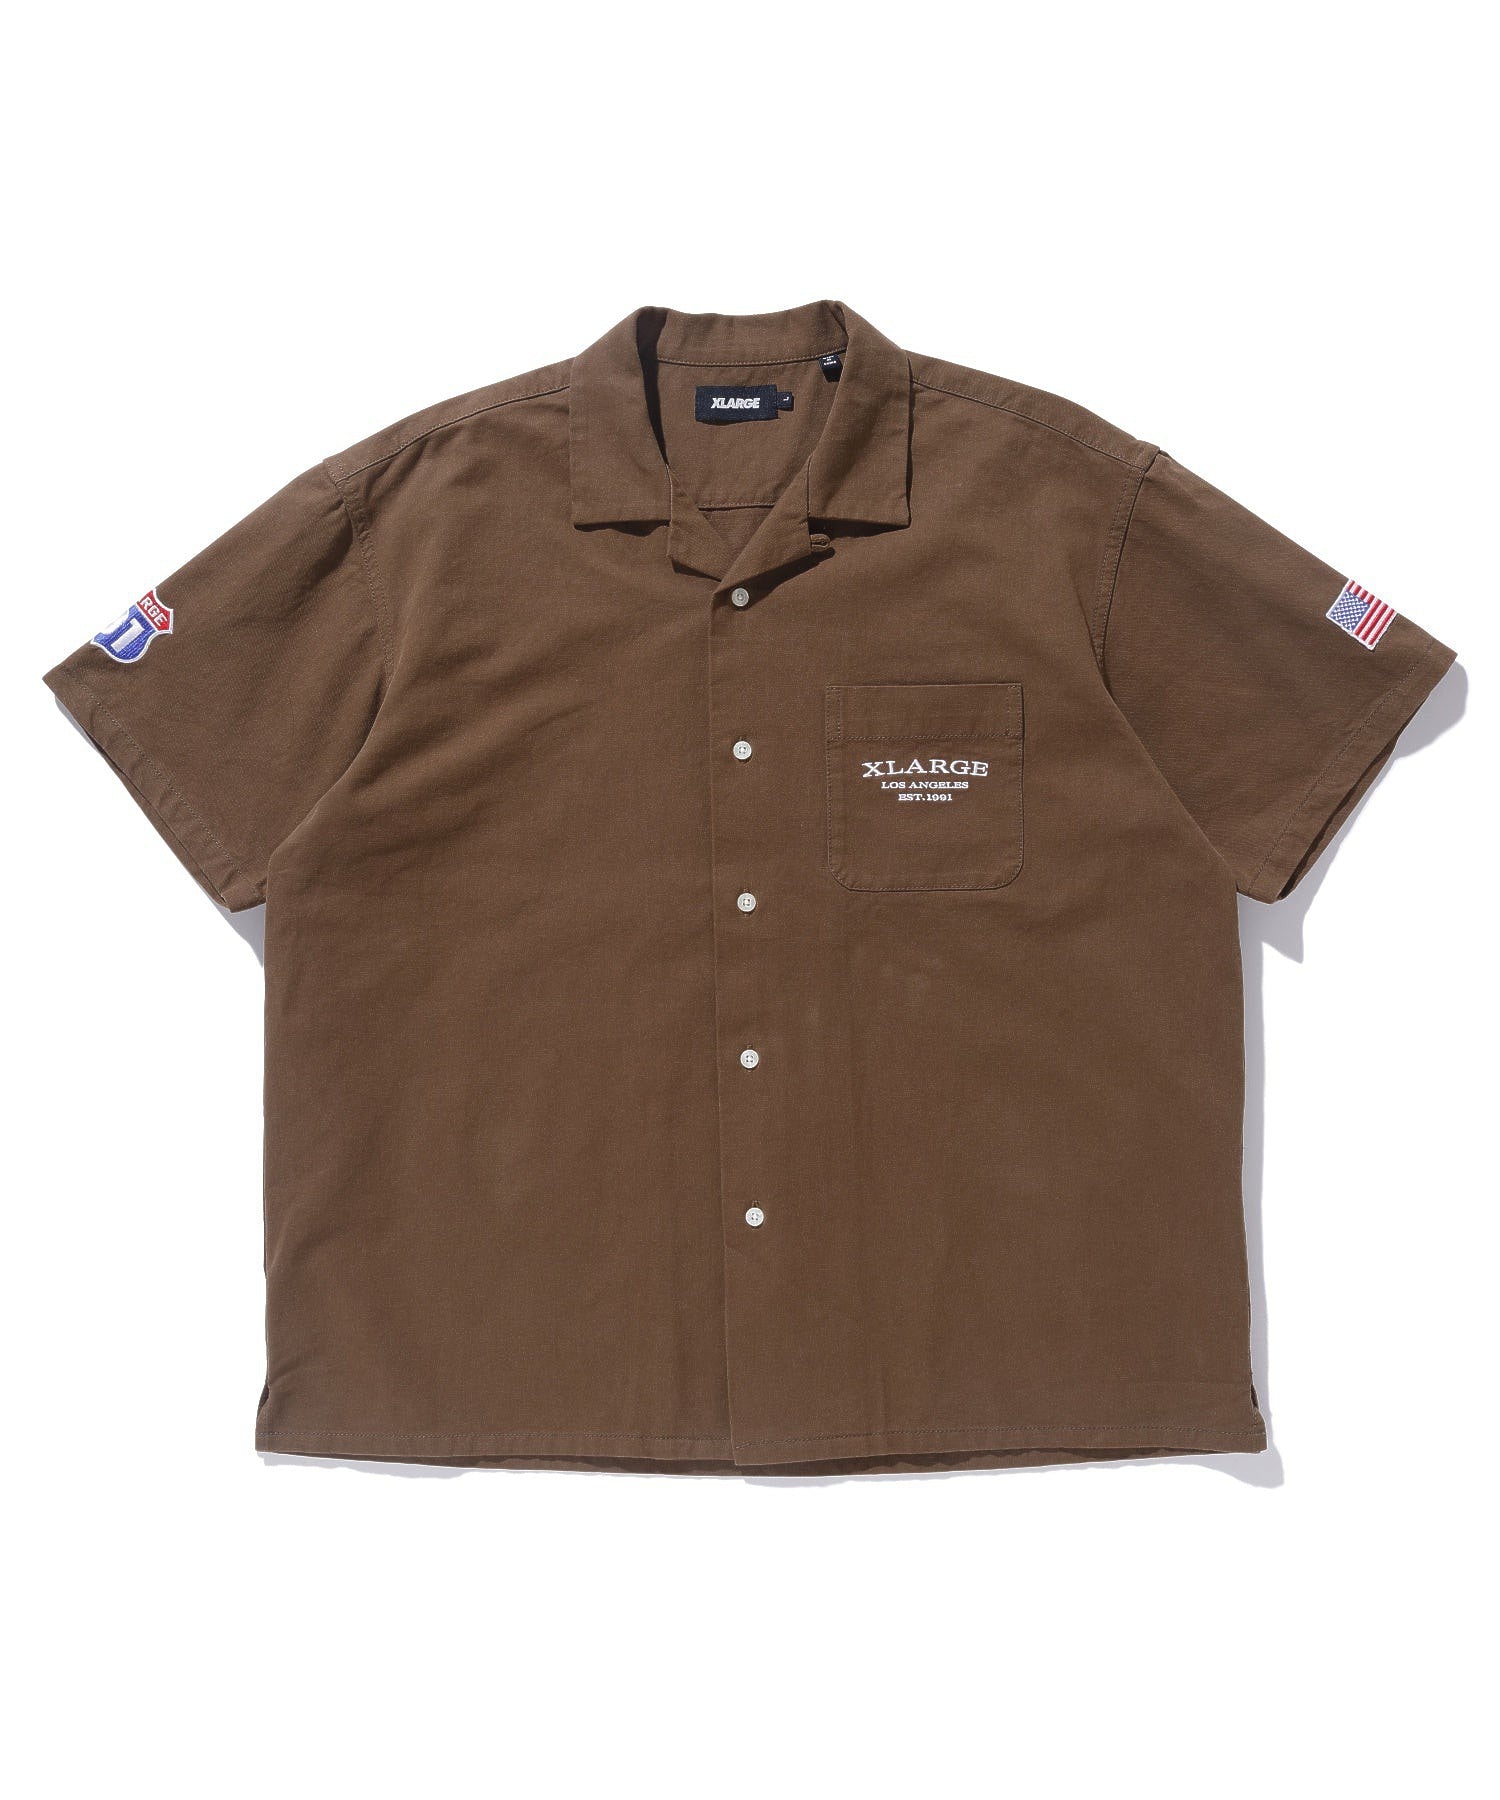 OLD PICK UP TRUCK S/S WORK SHIRT XLARGE